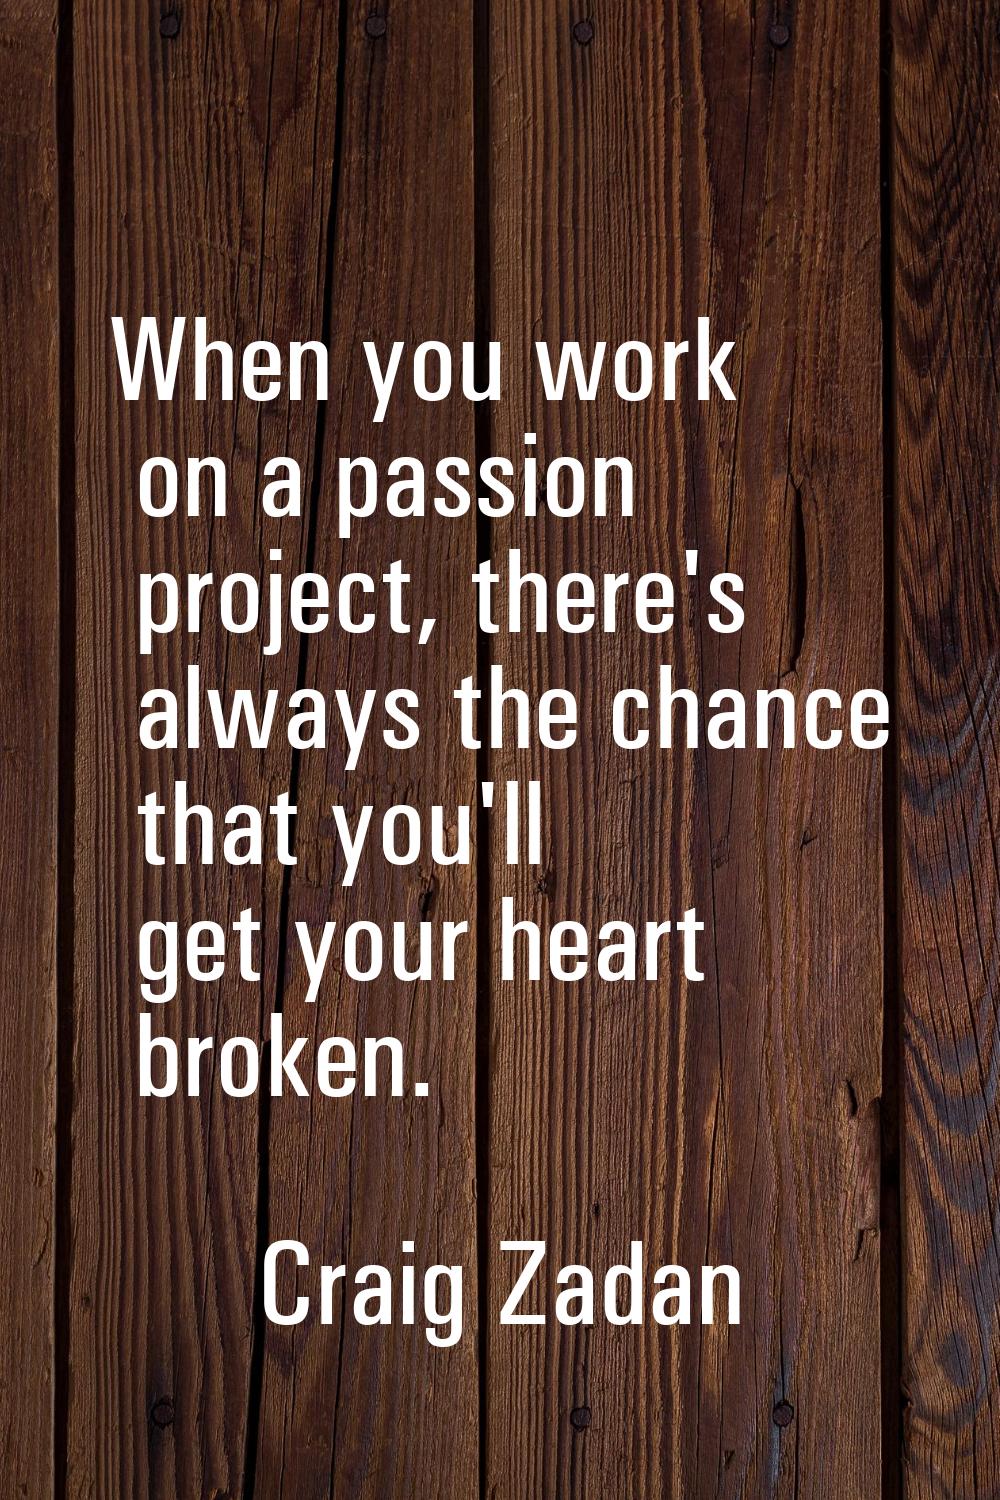 When you work on a passion project, there's always the chance that you'll get your heart broken.